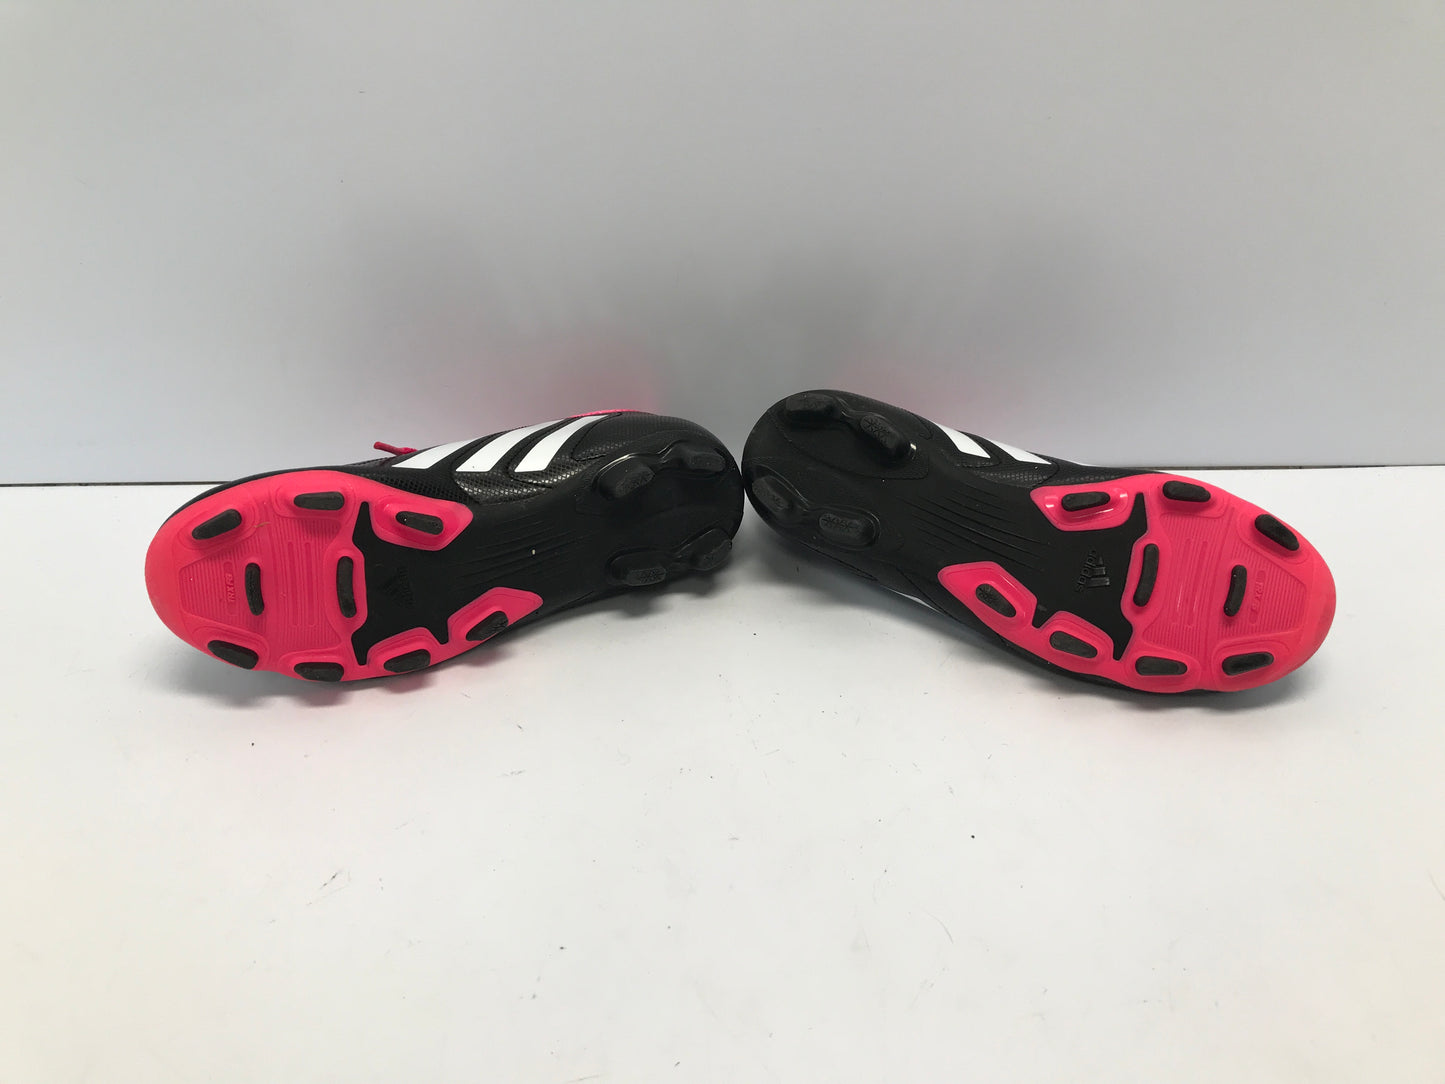 Soccer Shoes Cleats Child Size 2 Adidas Black Fushia Pink Excellent